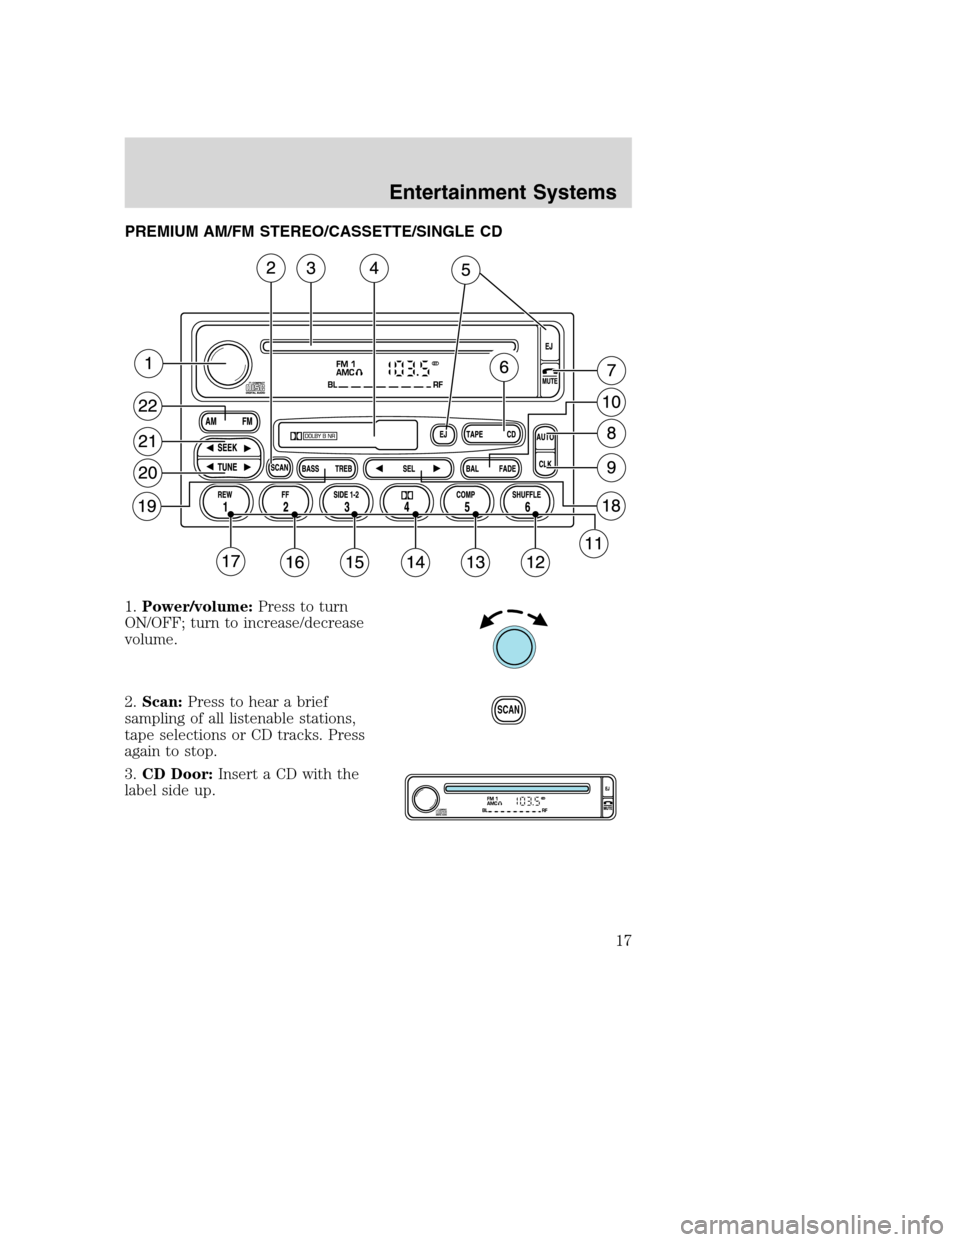 FORD EXCURSION 2003 1.G User Guide PREMIUM AM/FM STEREO/CASSETTE/SINGLE CD
1.Power/volume:Press to turn
ON/OFF; turn to increase/decrease
volume.
2.Scan:Press to hear a brief
sampling of all listenable stations,
tape selections or CD t